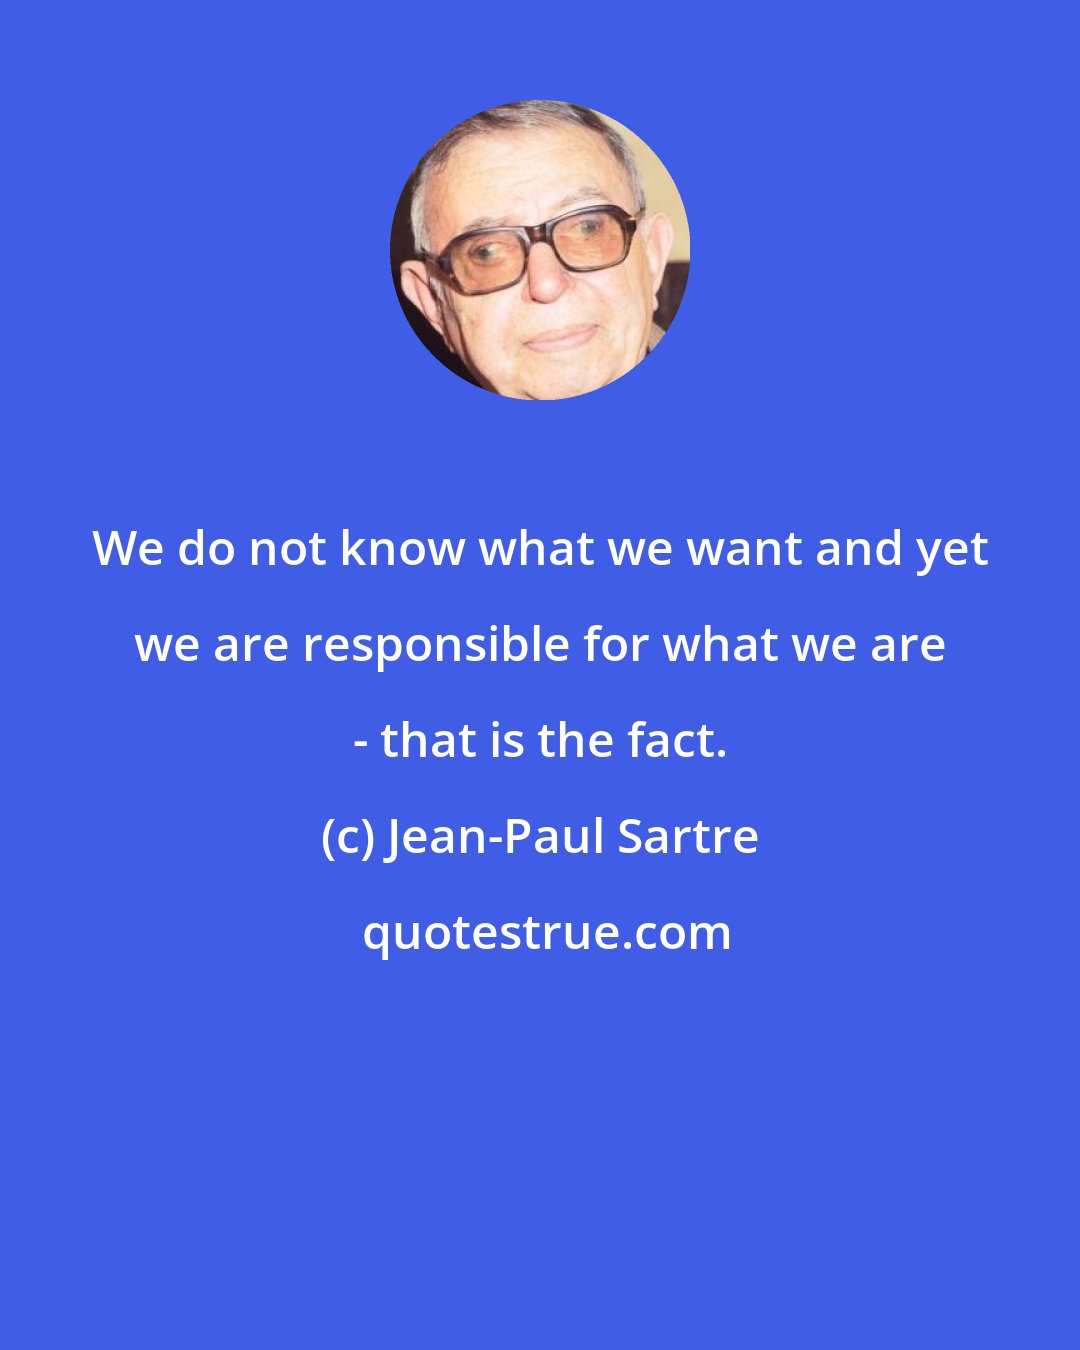 Jean-Paul Sartre: We do not know what we want and yet we are responsible for what we are - that is the fact.